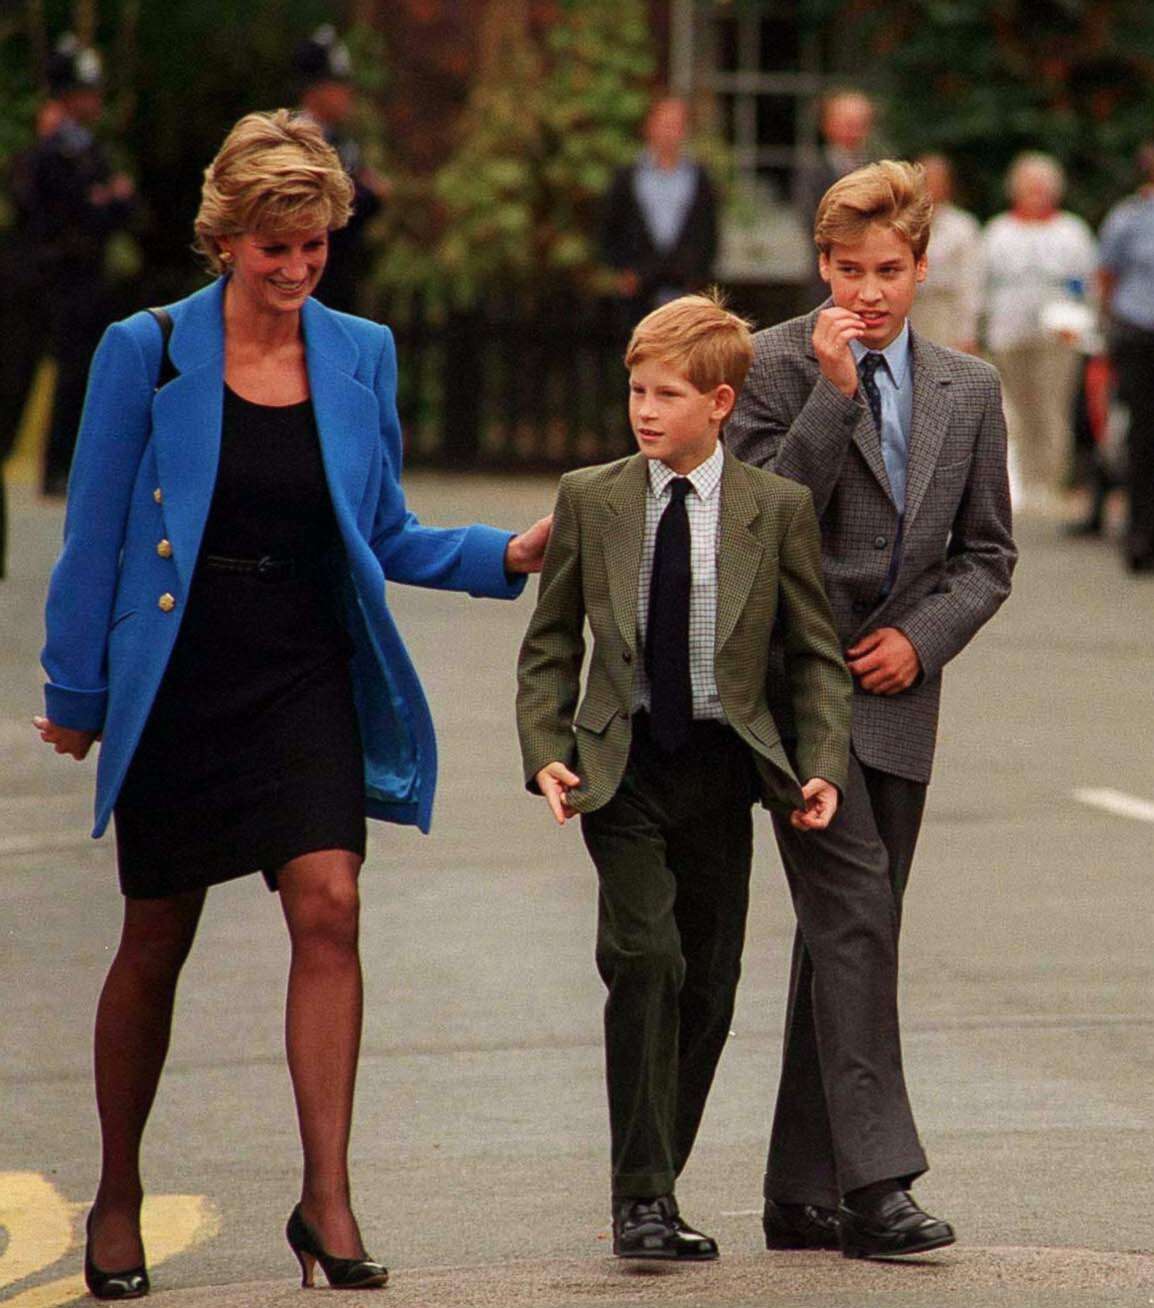 PHOTO: Prince William arrives with Diana, Princess of Wales and Prince Harry for his first day at Eton College on September 16, 1995 in Windsor, England. 